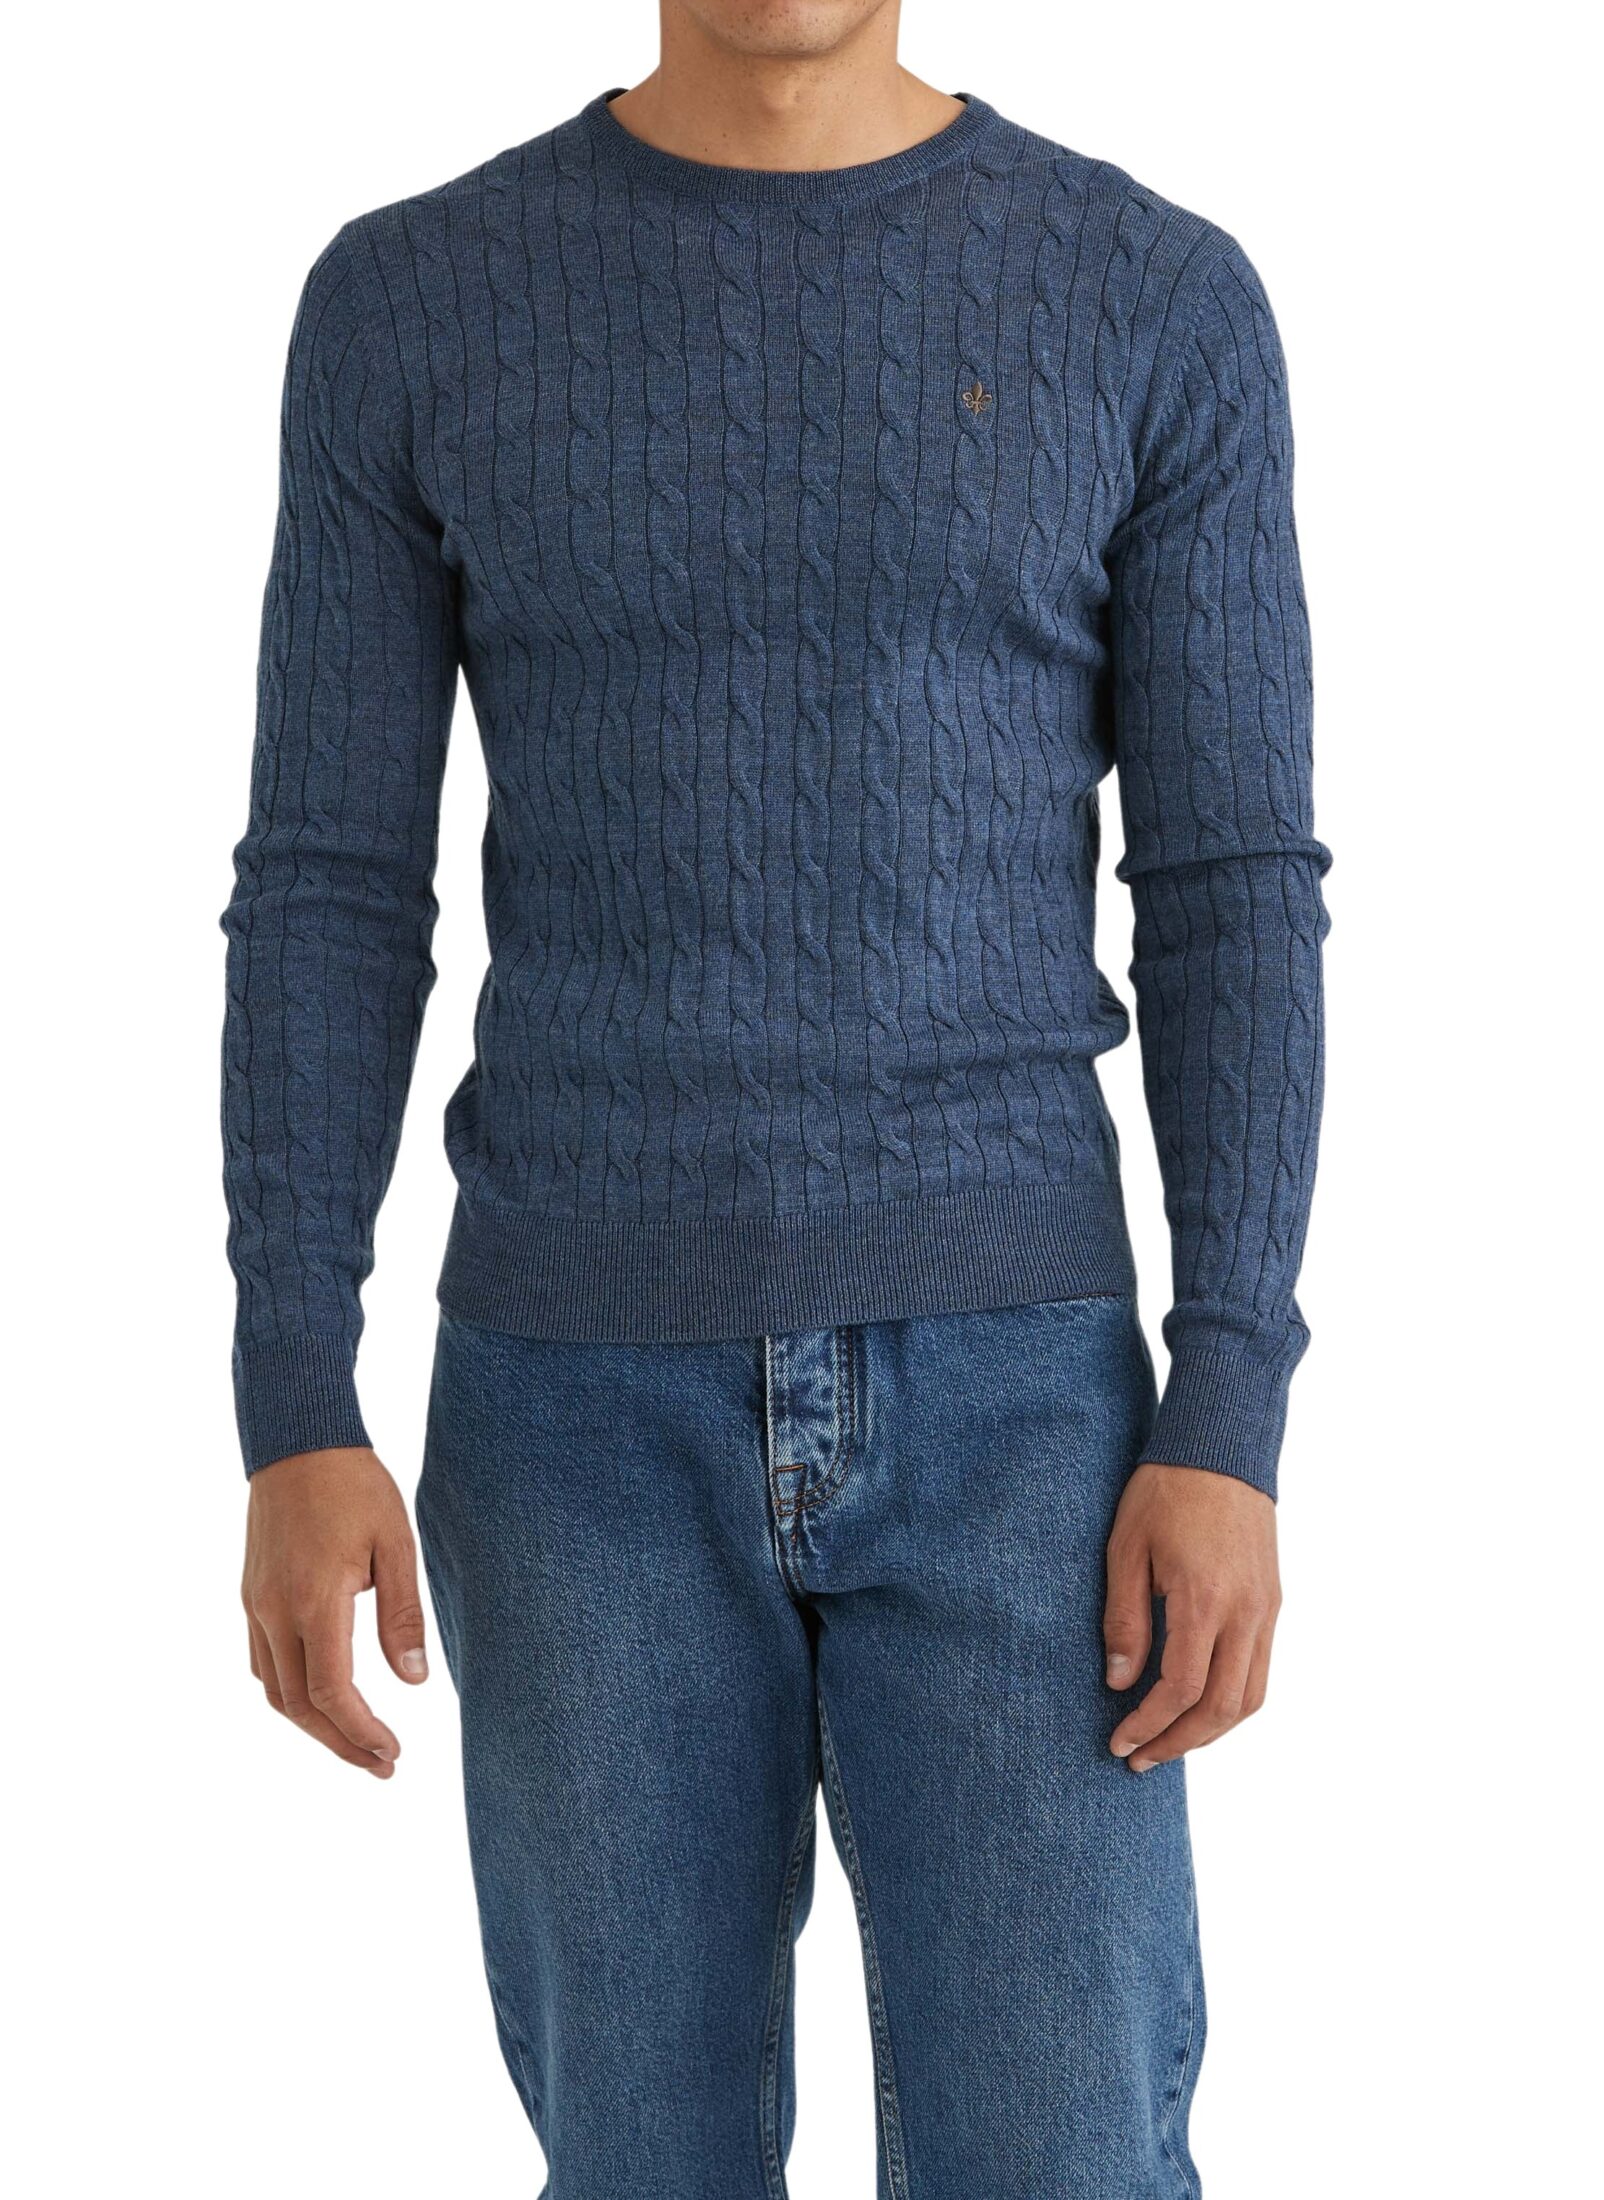 901274-merino-cable-oneck-57-blue-1